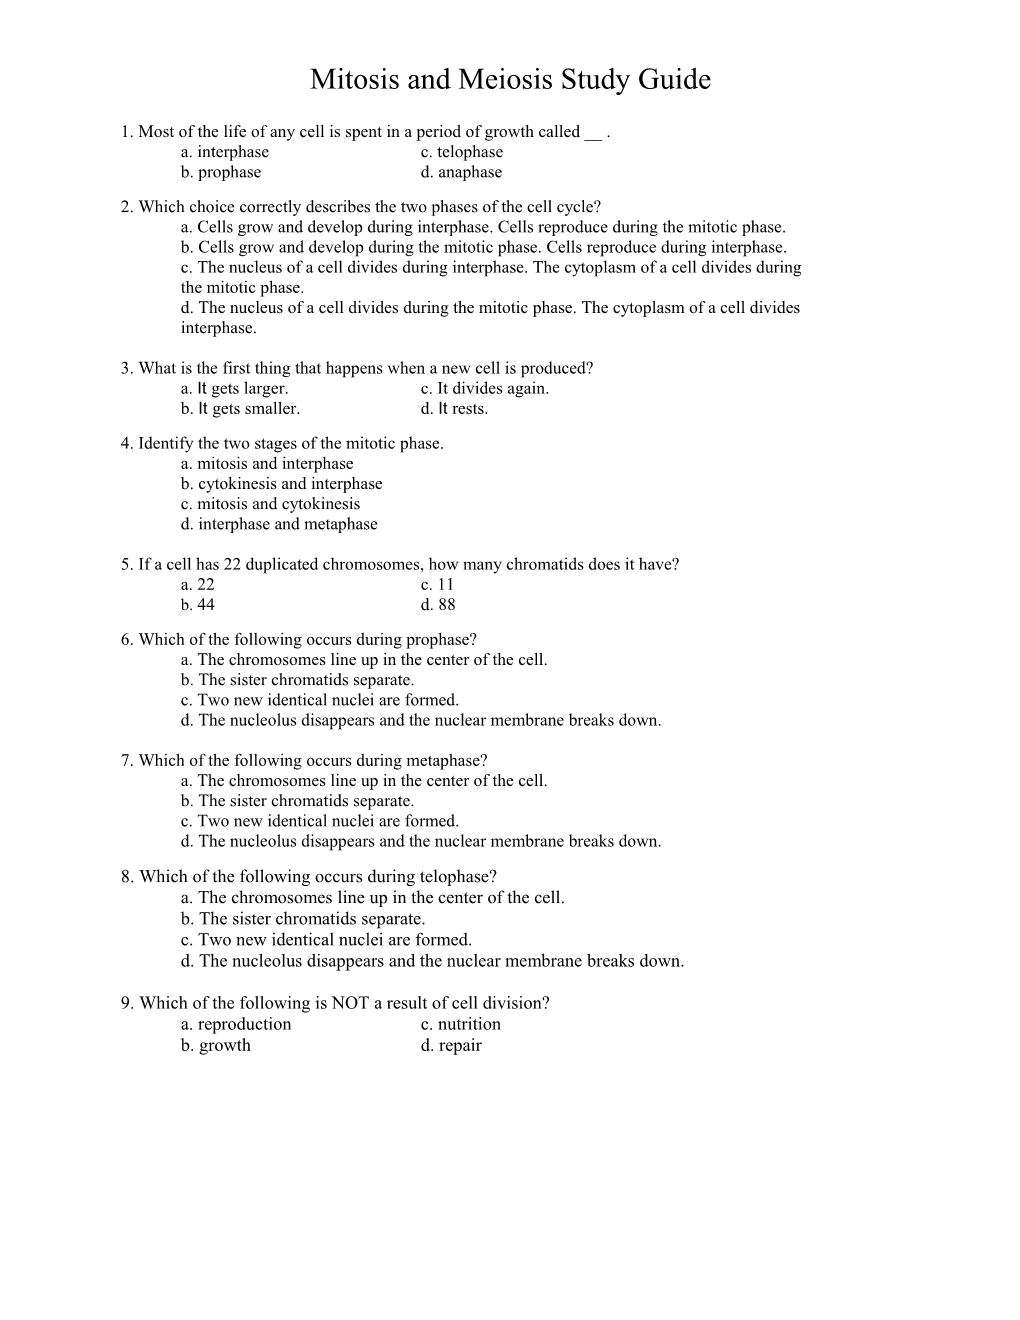 Mitosis and Meiosis Study Guide